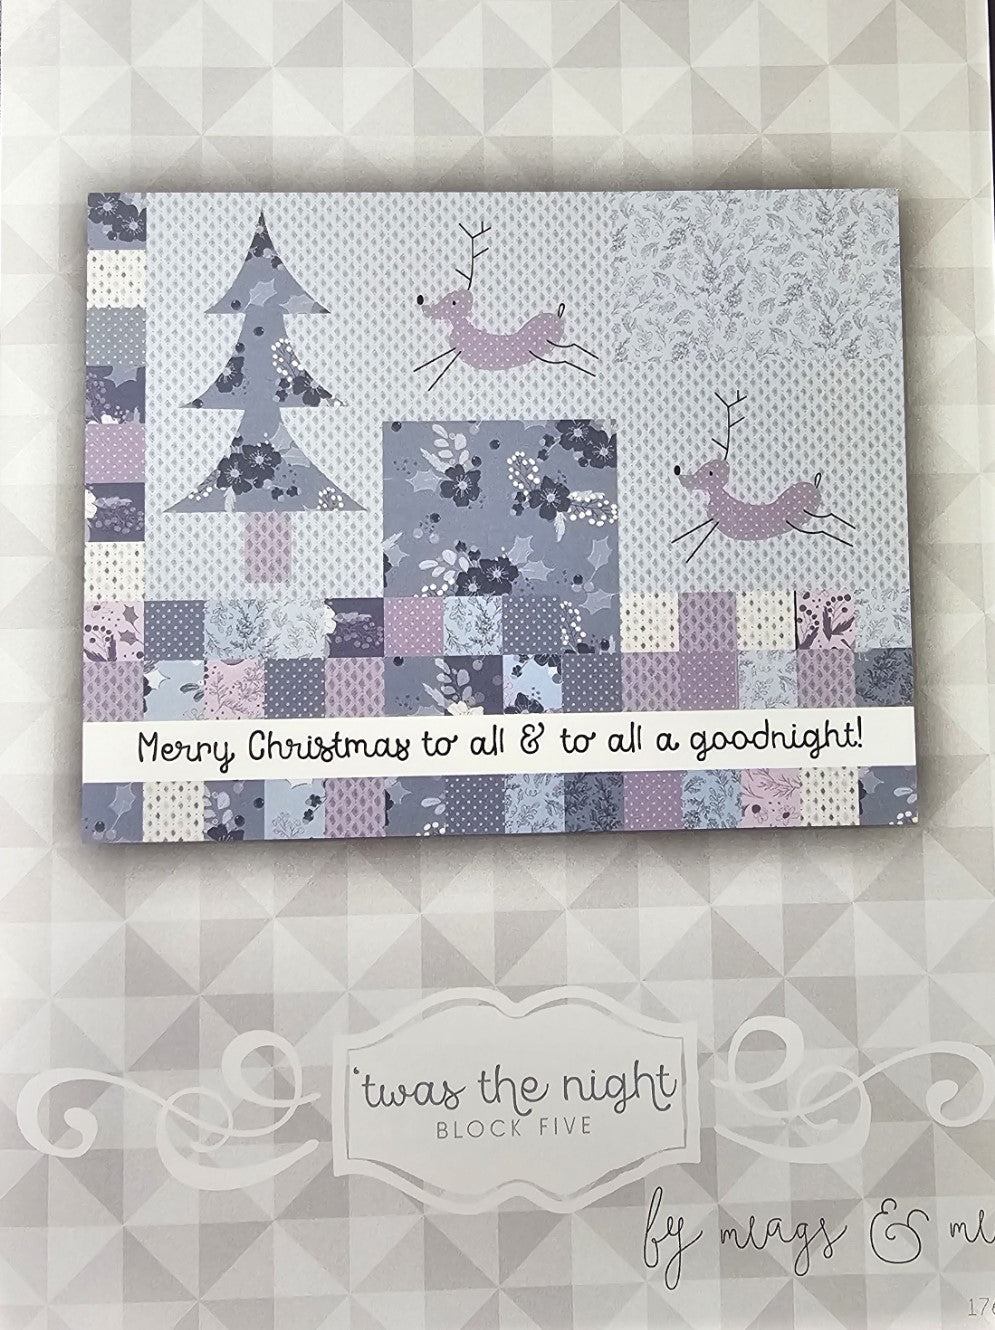 'TWAS THE NIGHT BOM Quilt Pattern by MEAGS & ME